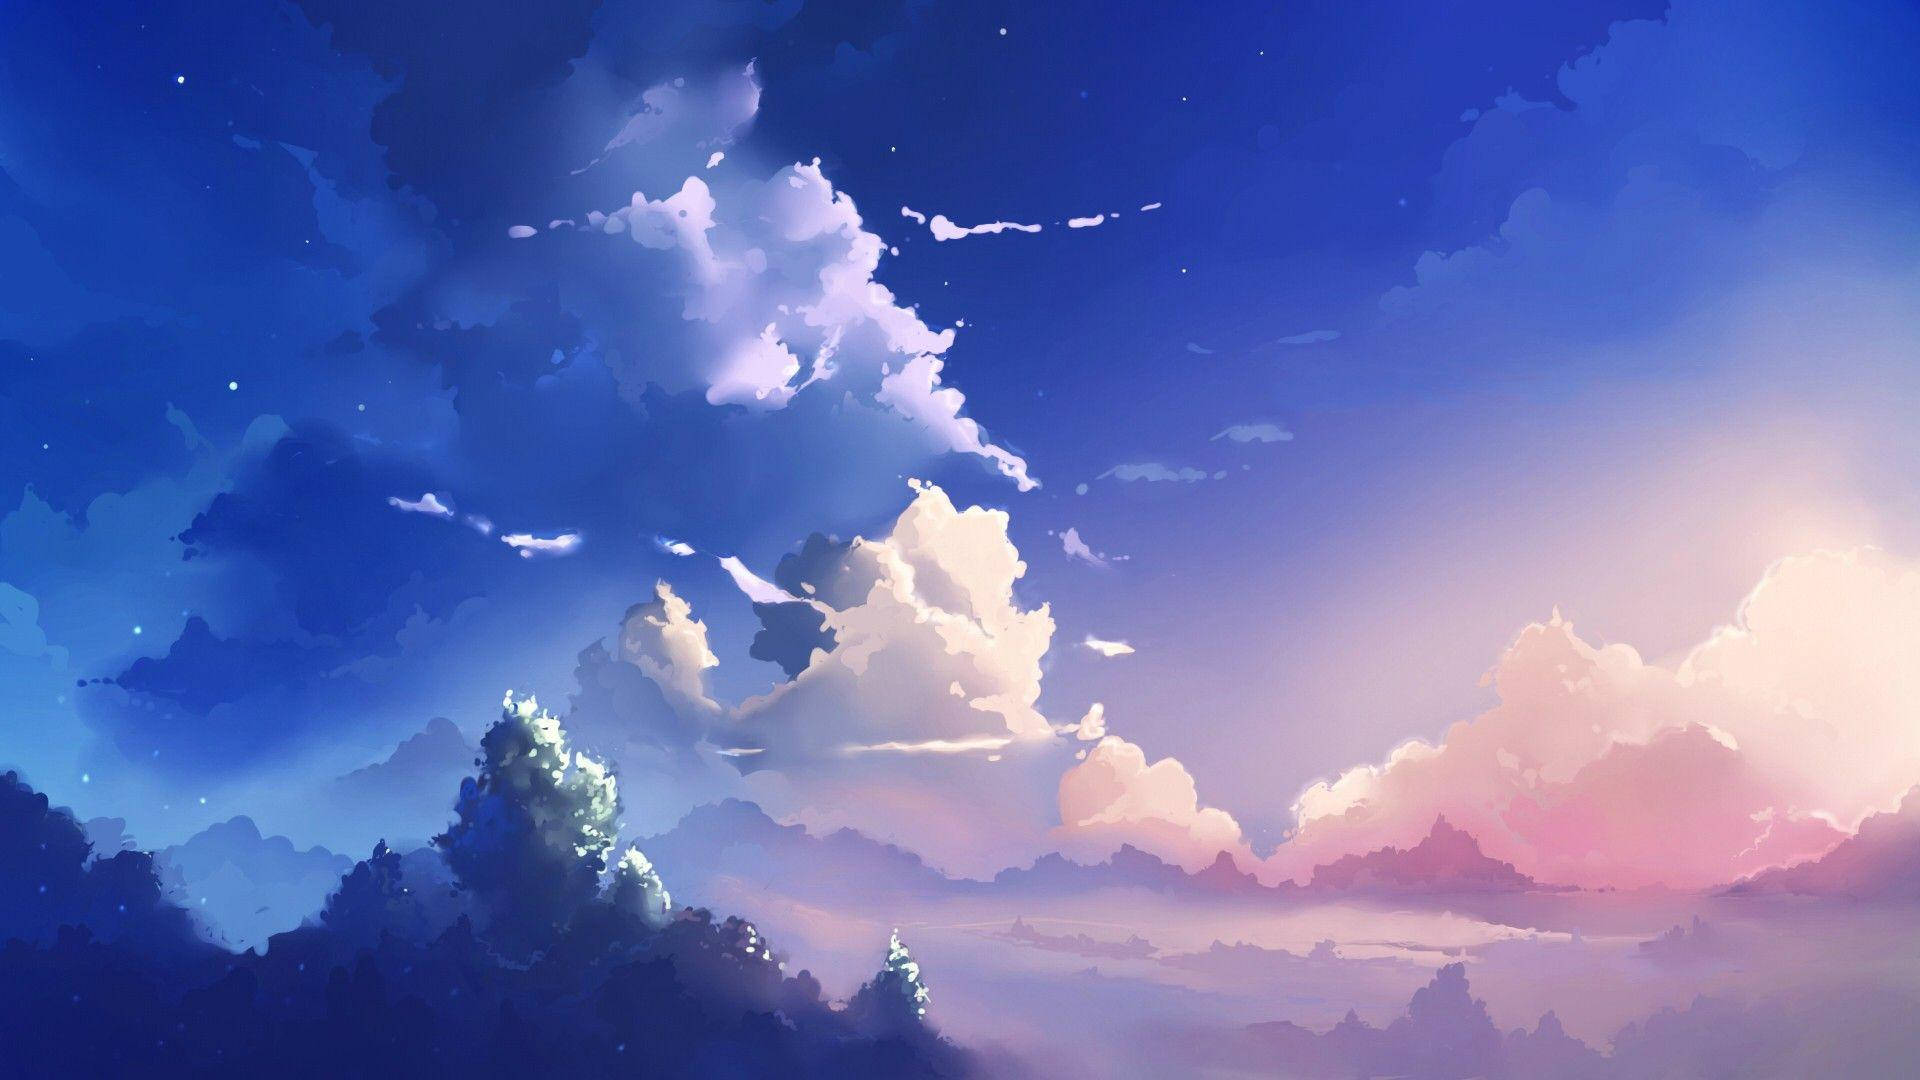 Wallpaper Anime Art, Aesthetics, Cloud, Atmosphere, Plant, Background -  Download Free Image